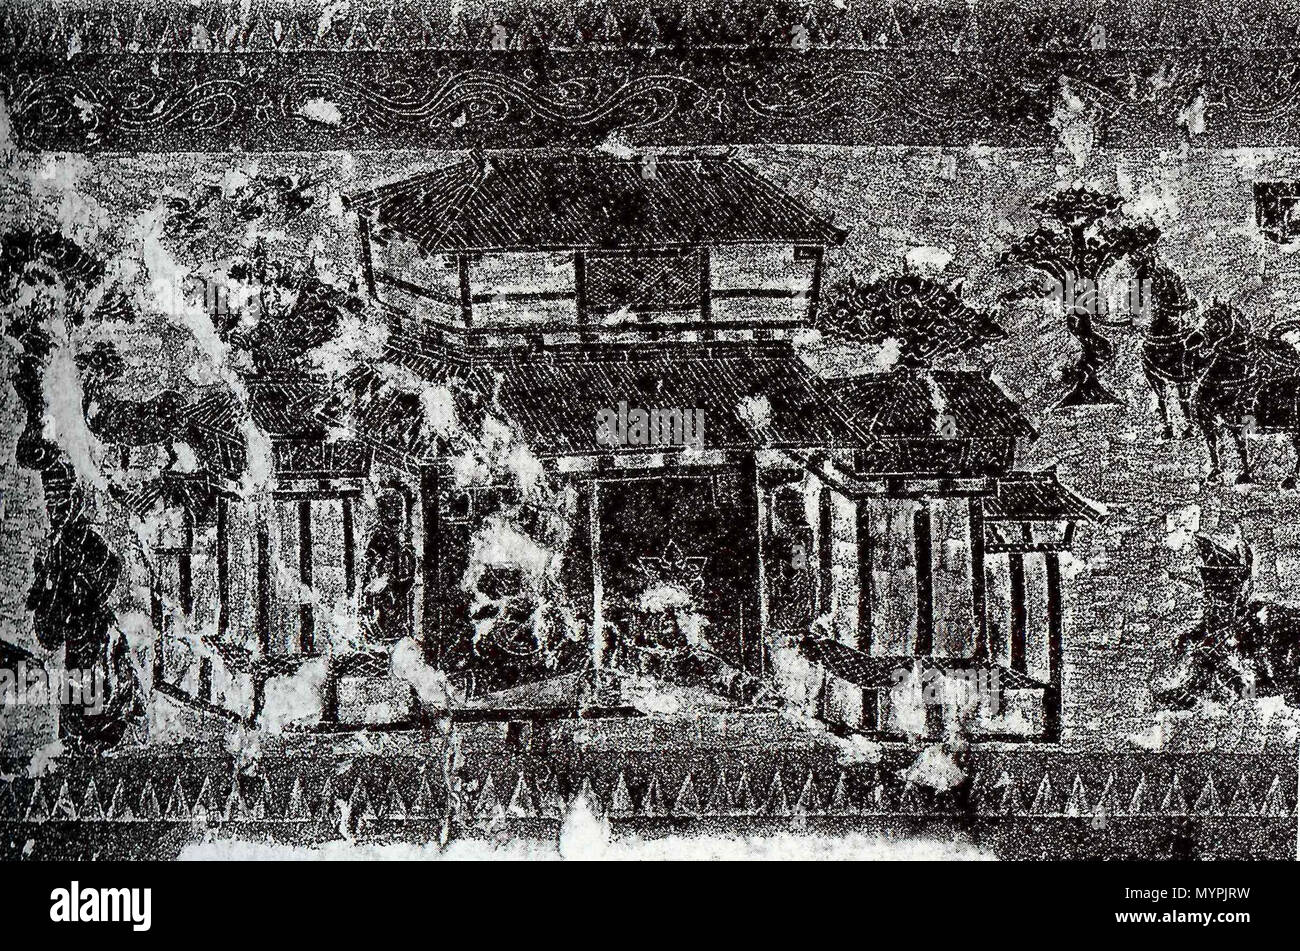 . A rubbing of a Chinese Han Dynasty (202 BC – 220 AD) pictorial stone (i.e. the Yinan stone carving of Shandong province, China) showing an ancestral worship hall (citang 祠堂) with closed doors, a person outside making a sacrificial offering to his ancestors, and horses and trees in the background. 202 BC to 220 AD. Unknown 463 Rubbing of a Han Citang Stock Photo